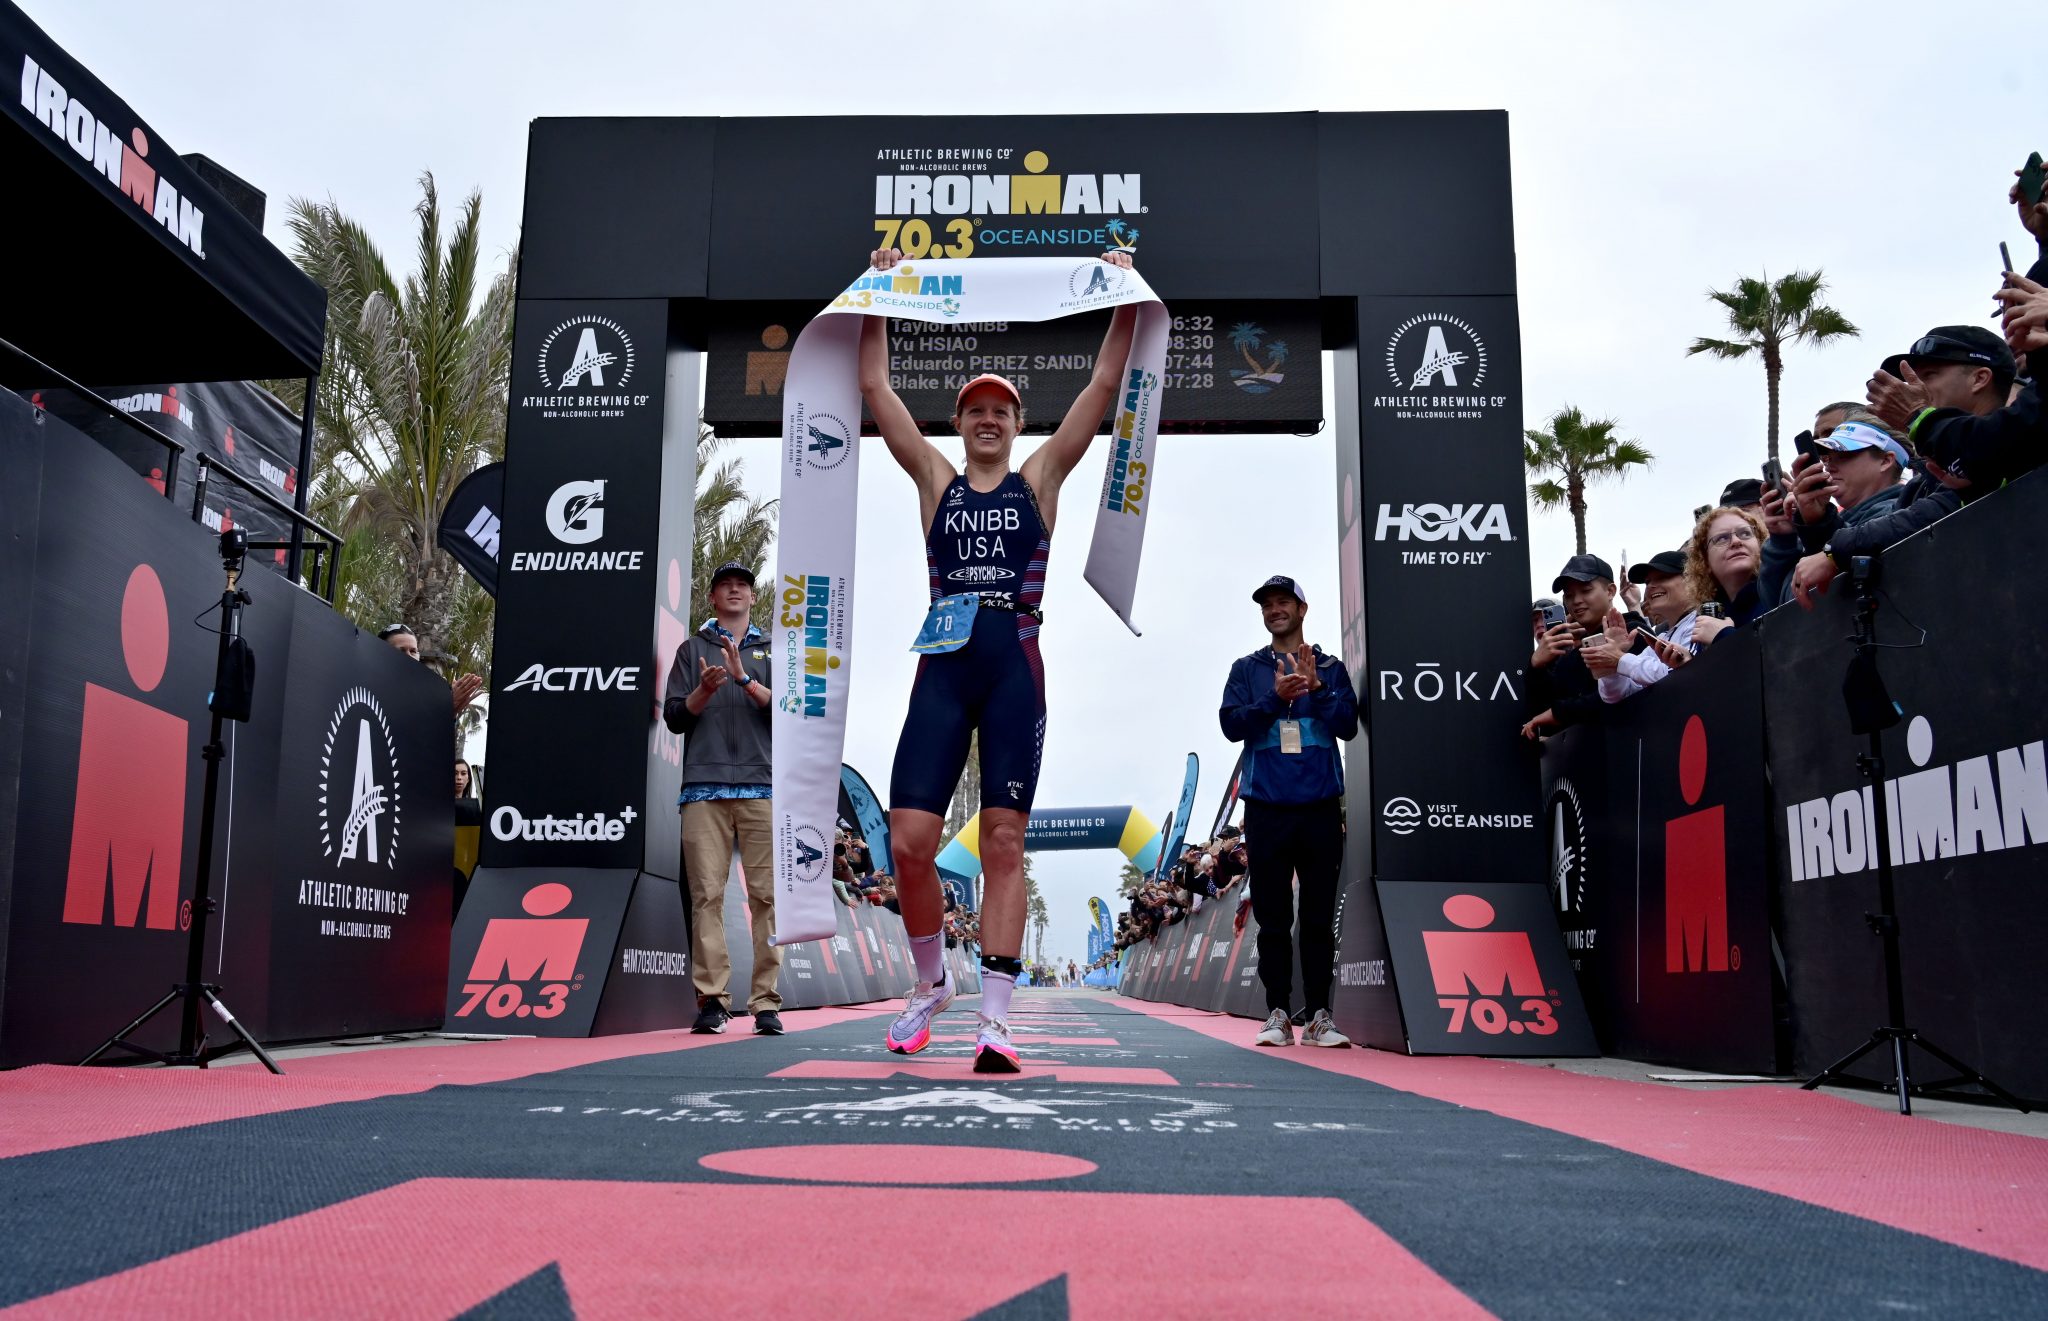 Taylor Knibb Claims IRONMAN 70.3 Oceanside Victory, Rudy von Berg Takes ...